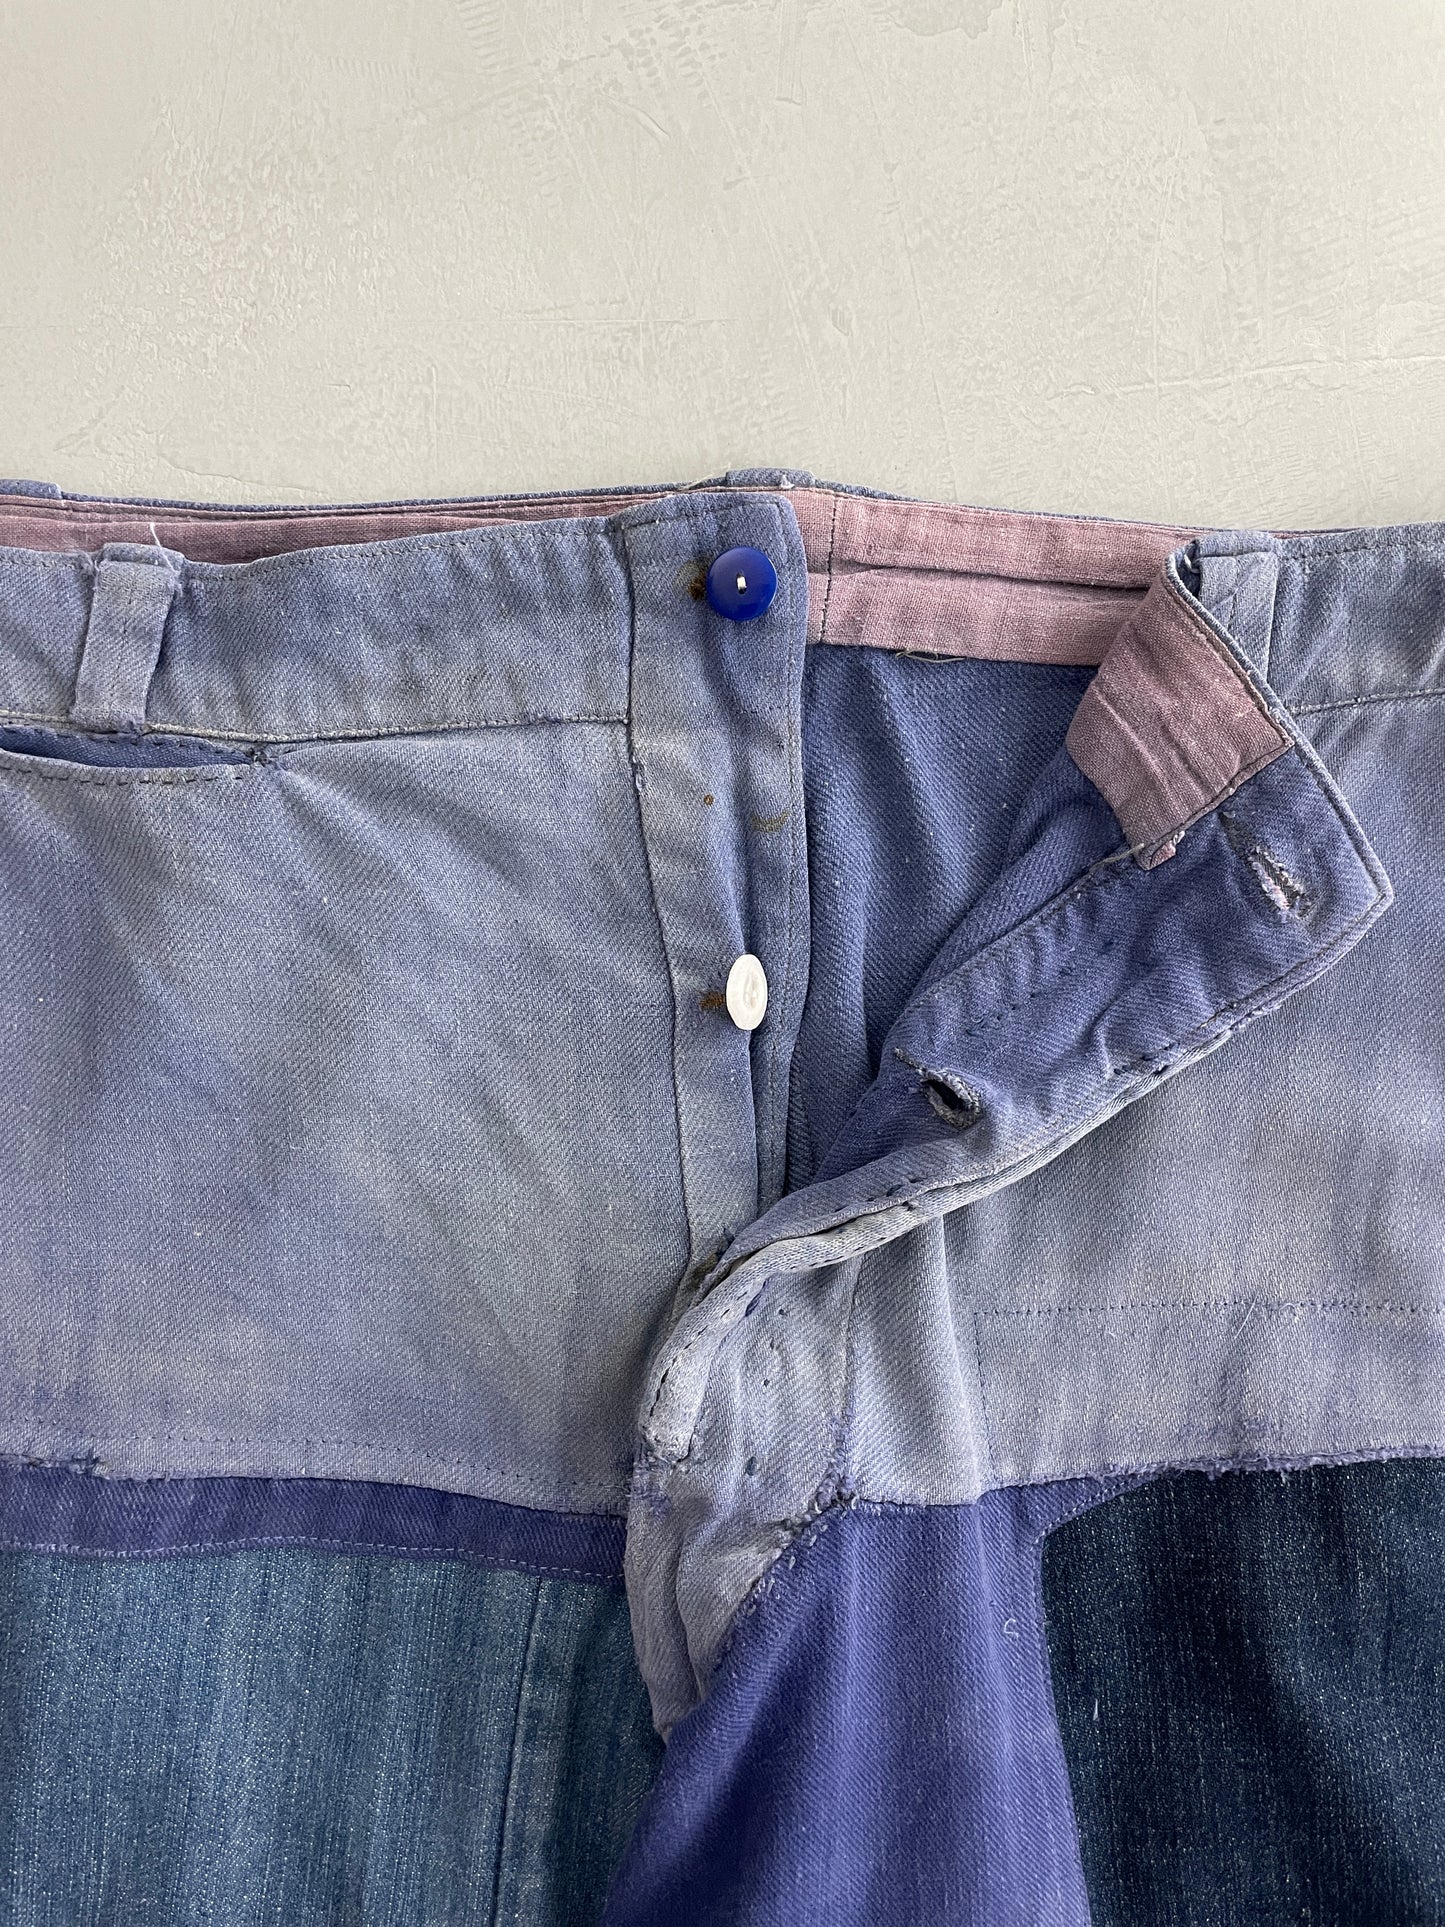 Patch/Repaired French Work Pants [35"]